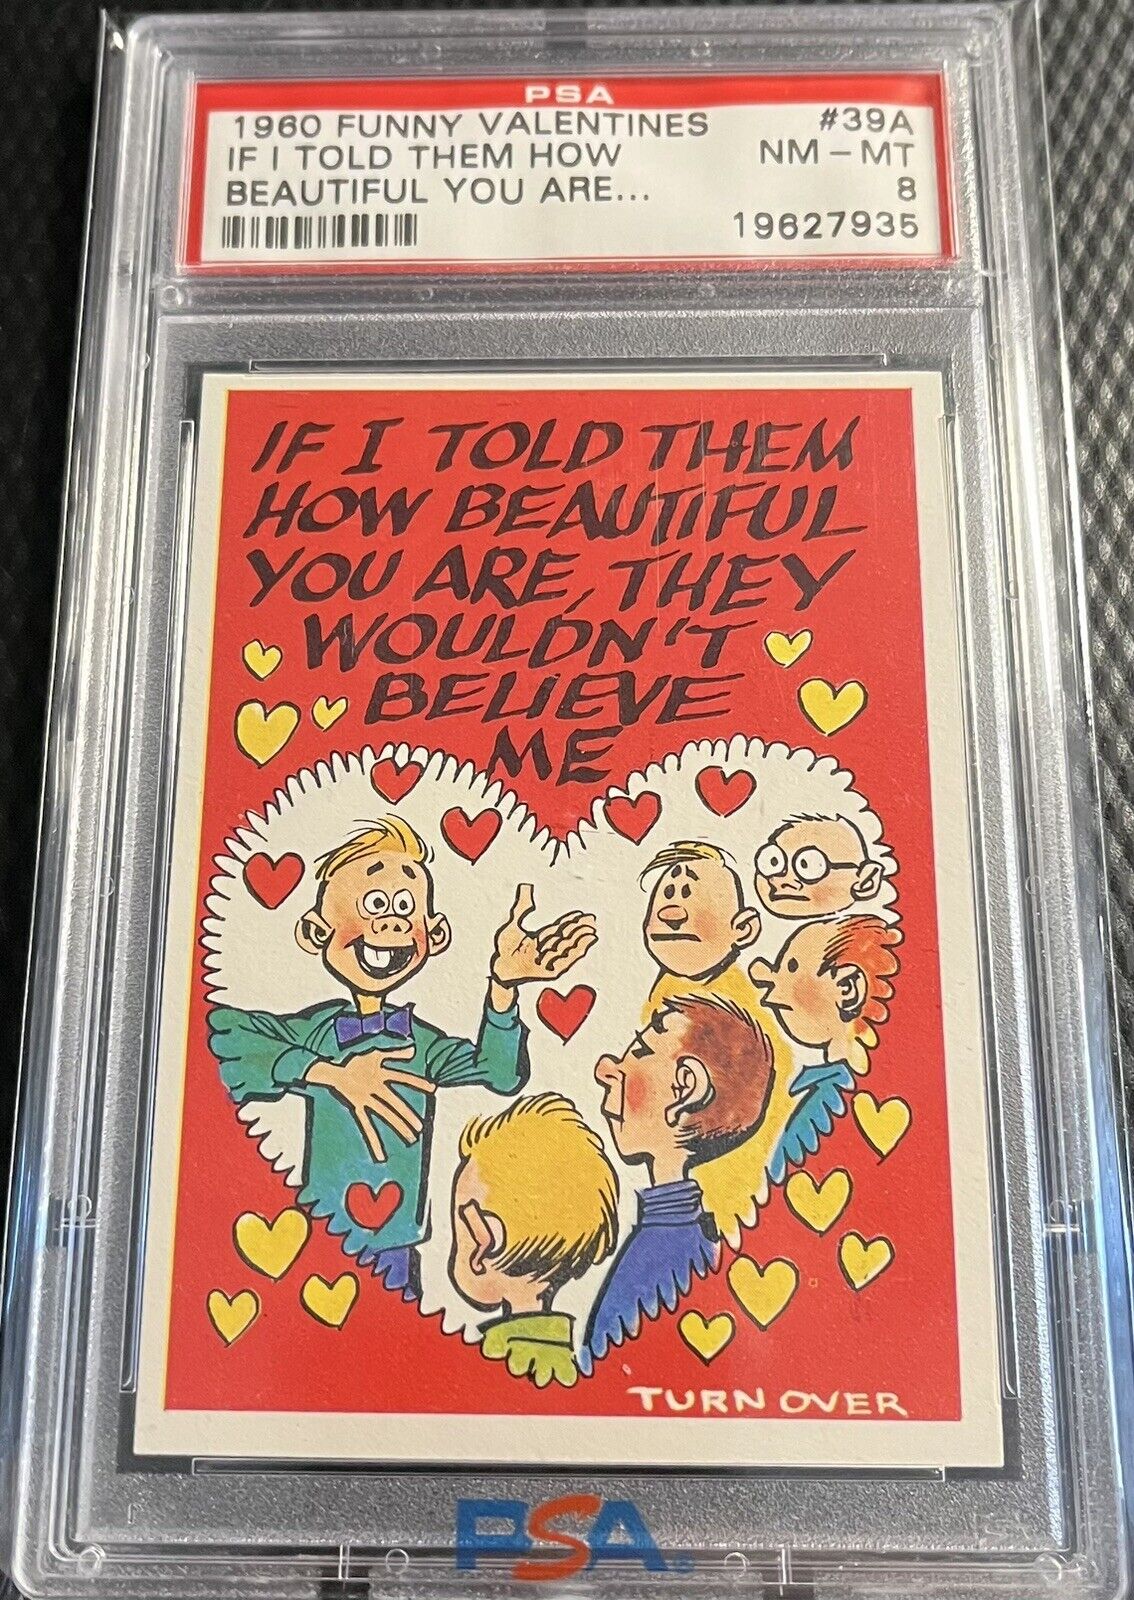 1960 Topps PSA 8 Vintage Funny Valentines #39A Graded NM-MT - Clean Holder